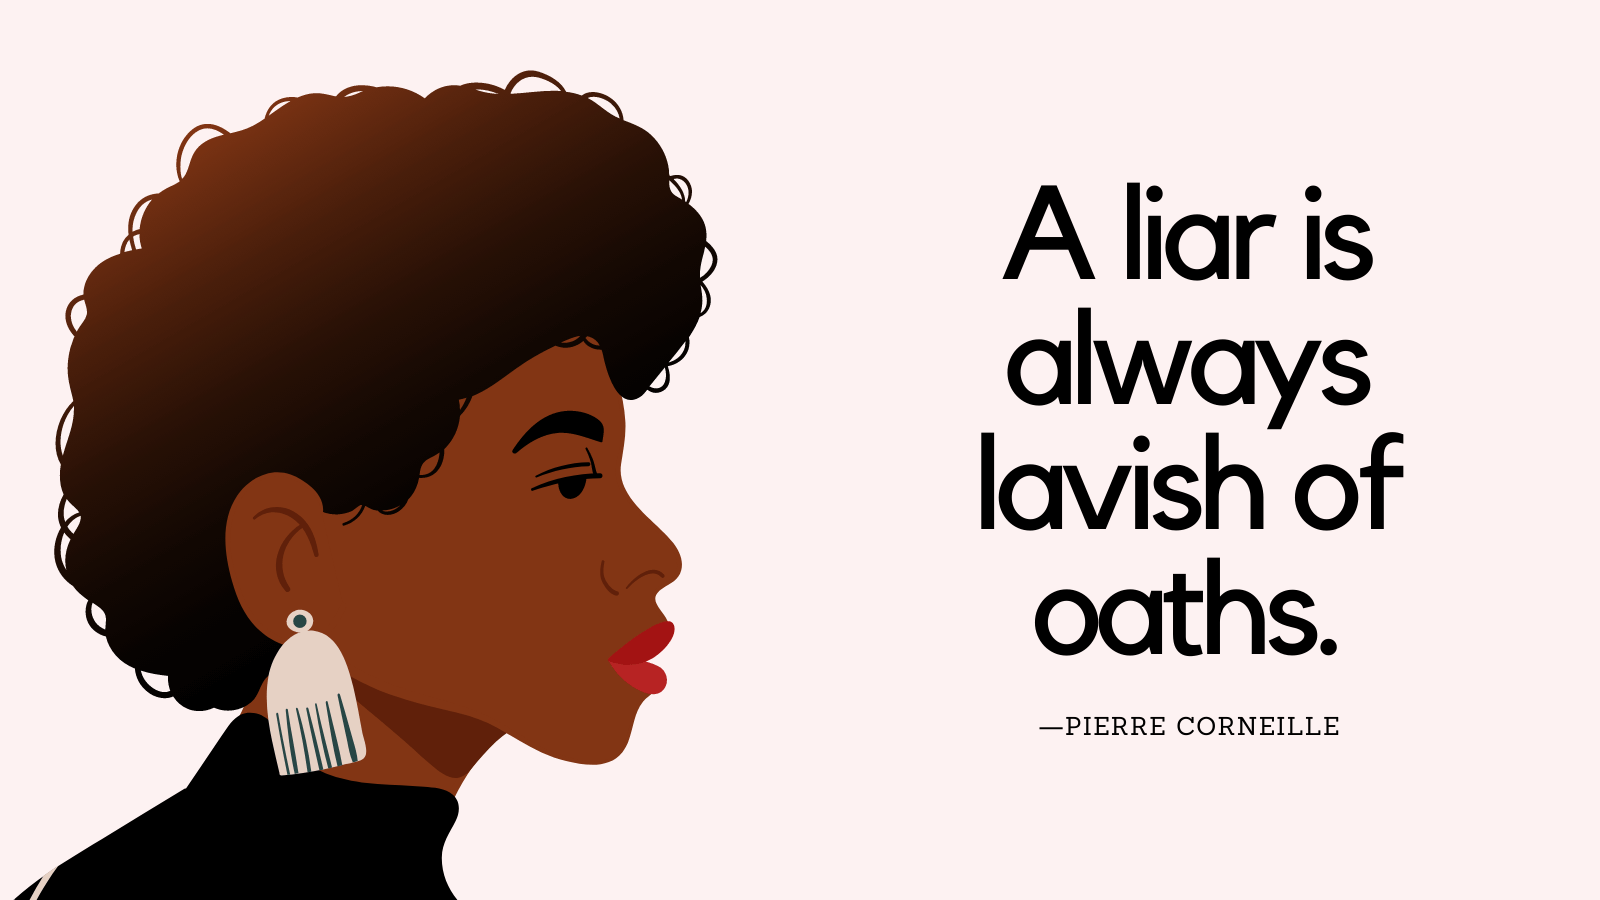 quotes about liars